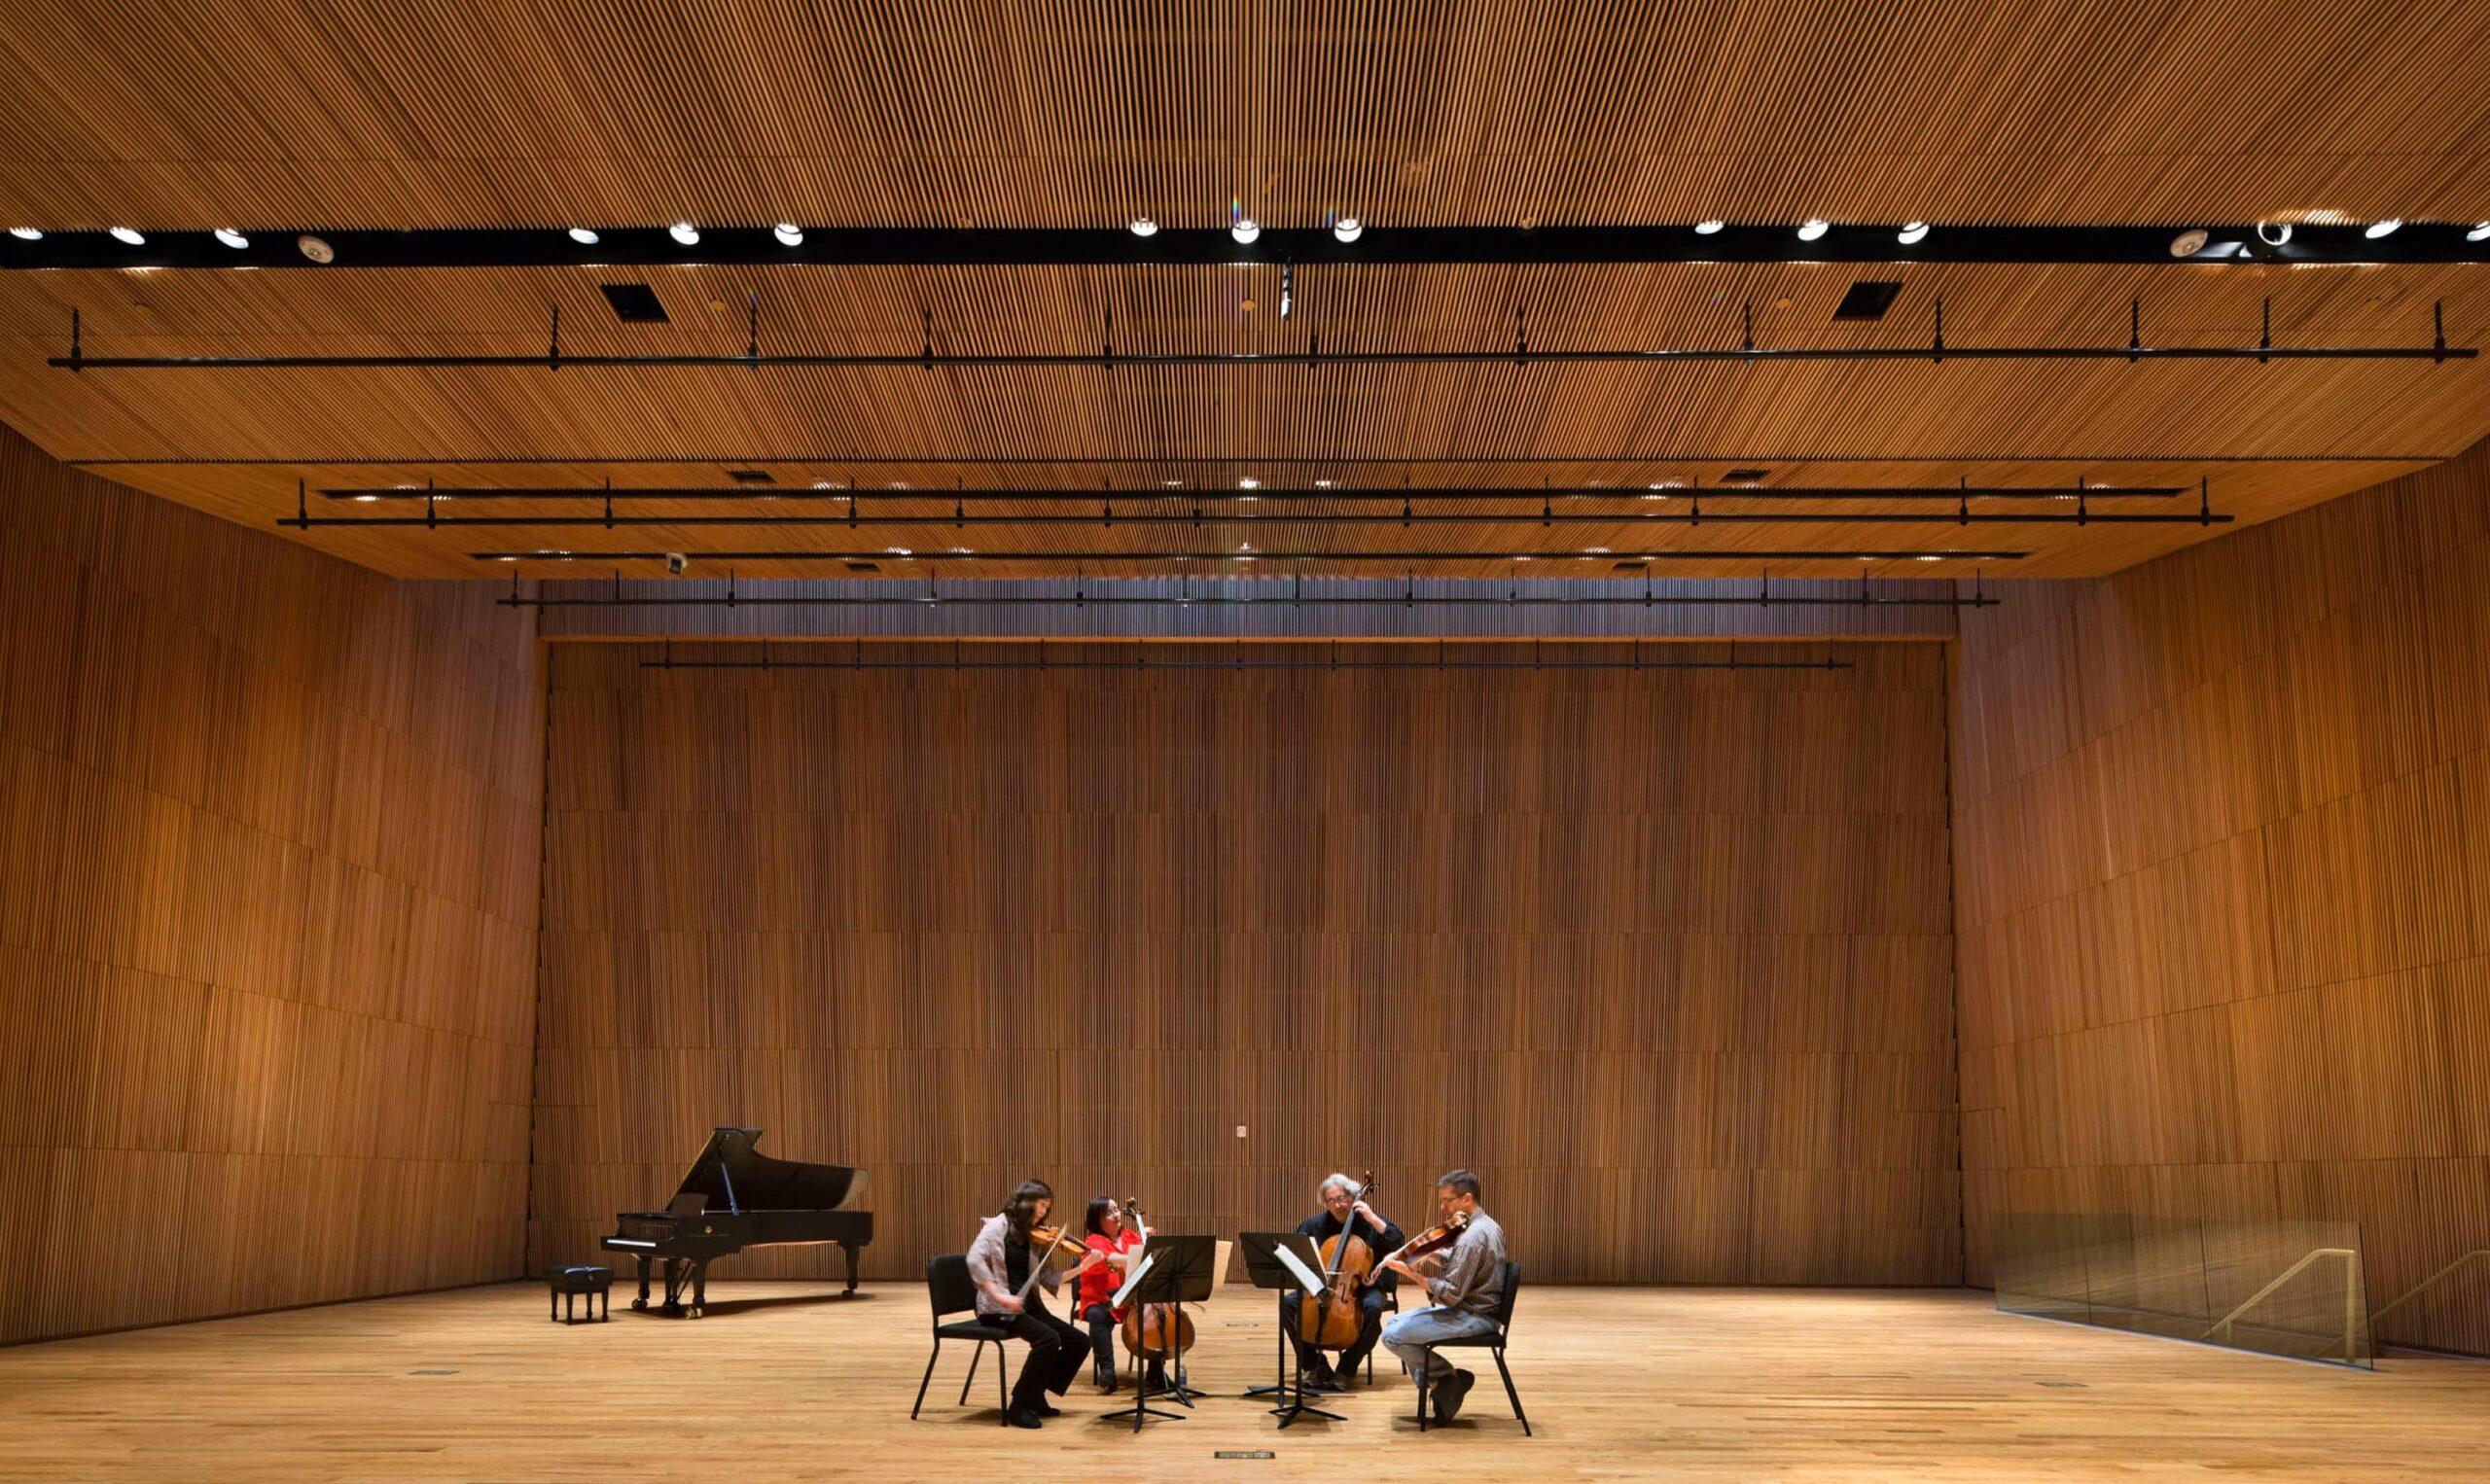 Orchestra of St. Luke’s – The DiMenna Center for Classical Music